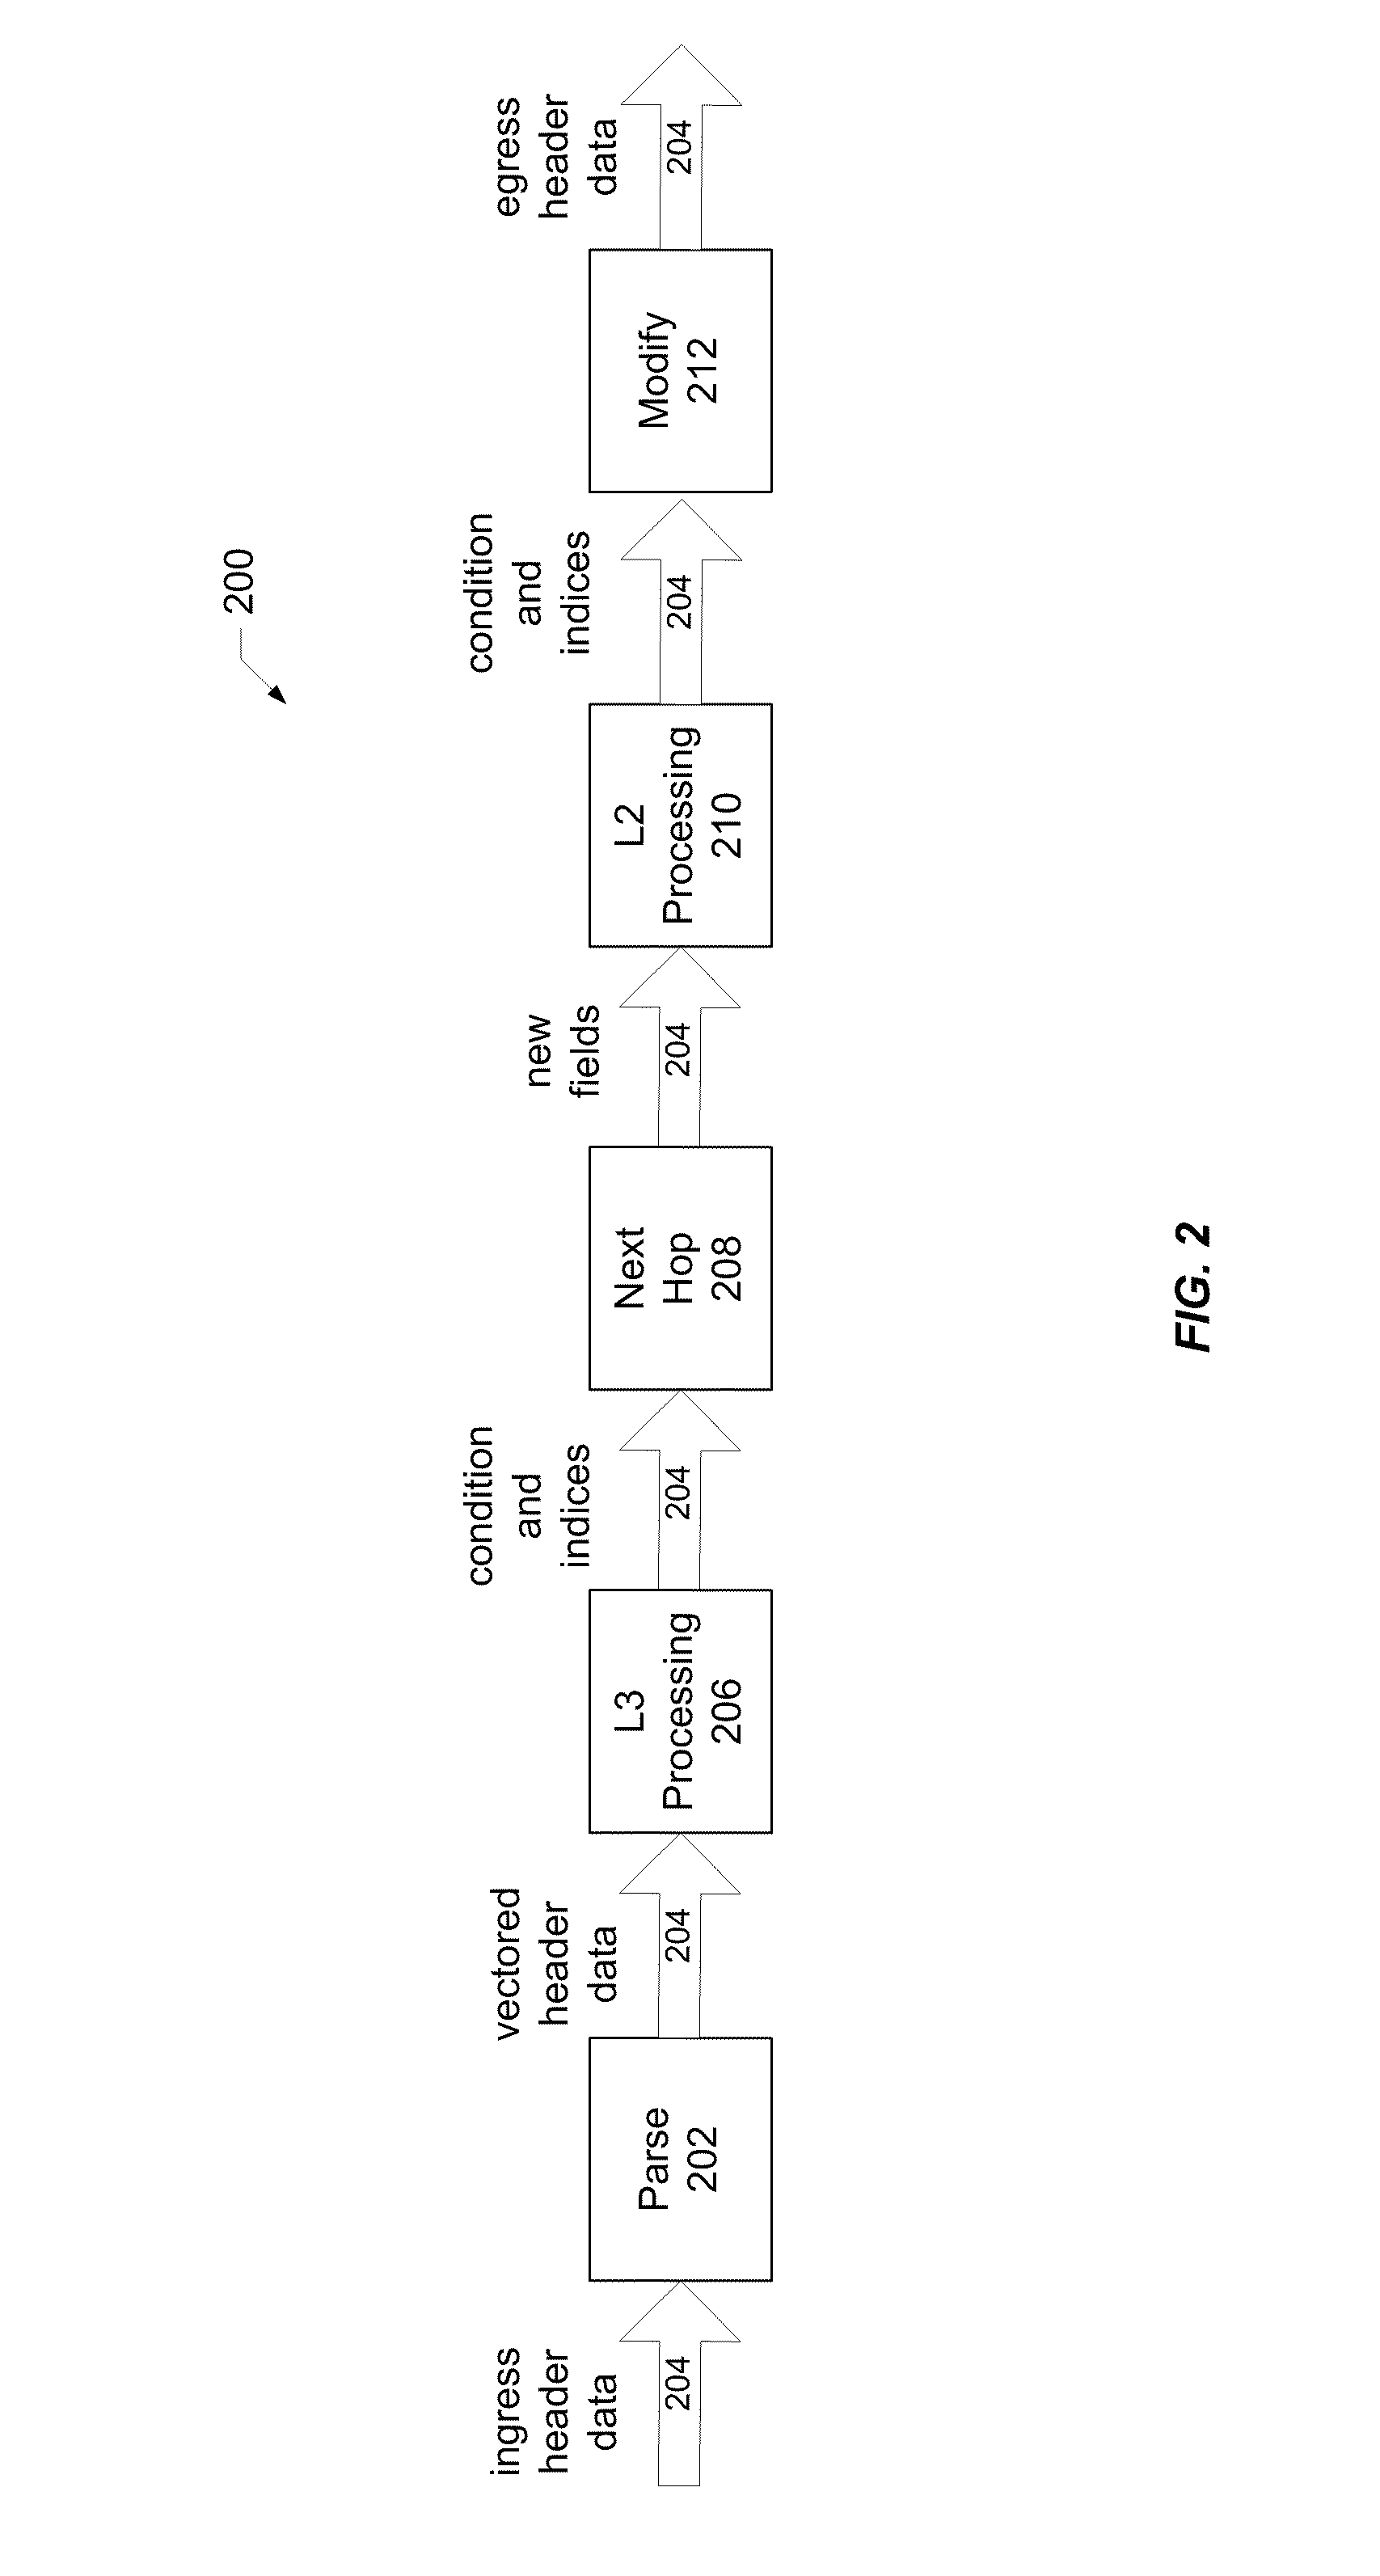 Configurable frame processing pipeline in a packet switch